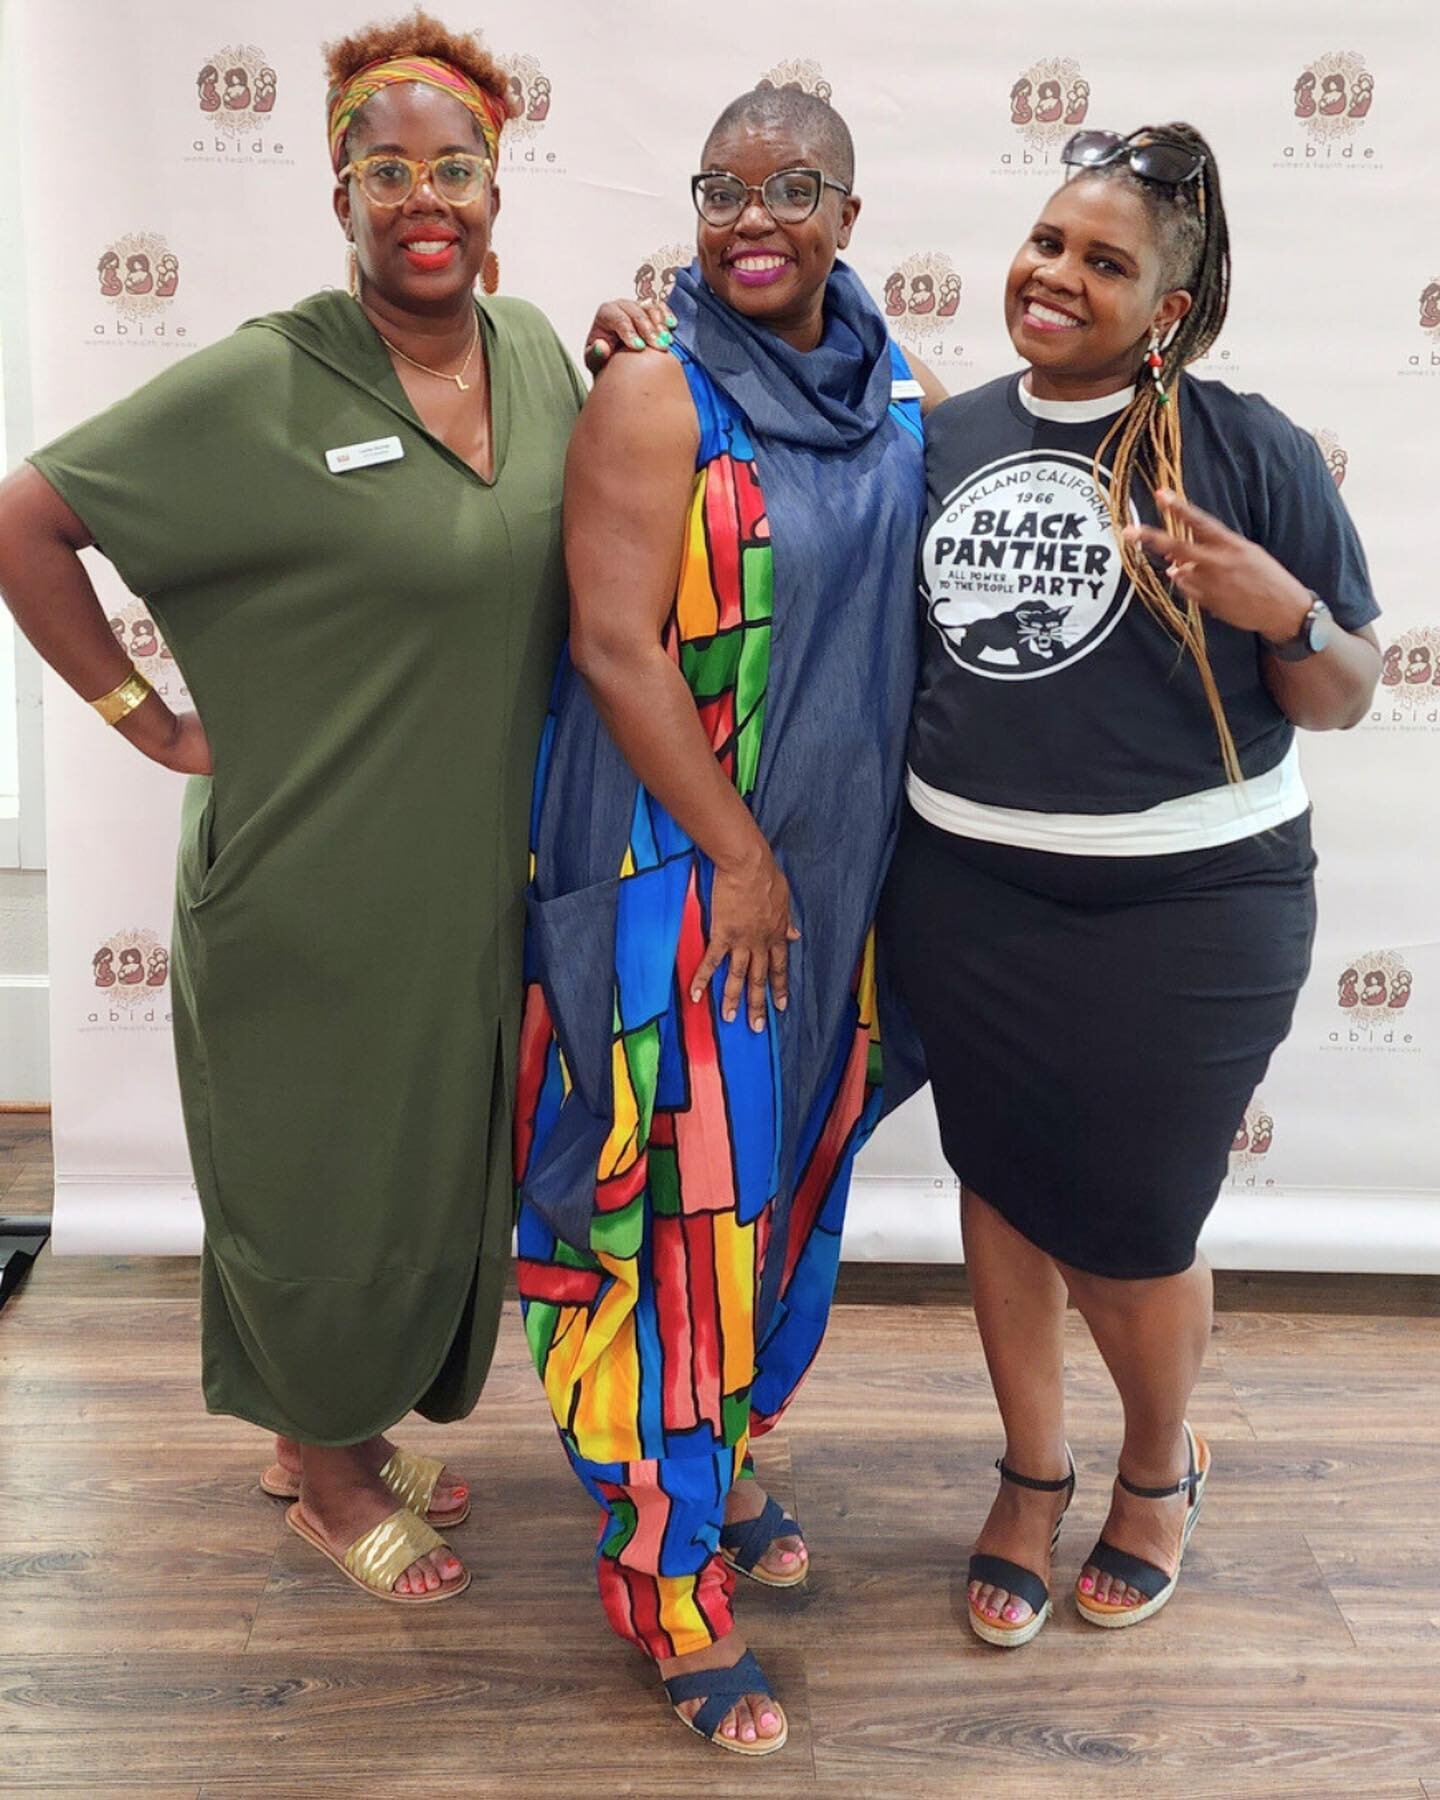 Recently, HERitage had the honor of attending the Juneteenth Lunch &amp; Learn hosted by @abide_women (a 2021 HERitage grant recipient.). The purpose of the event was for members of the DFW community to learn about their newest endeavor to fundraise 